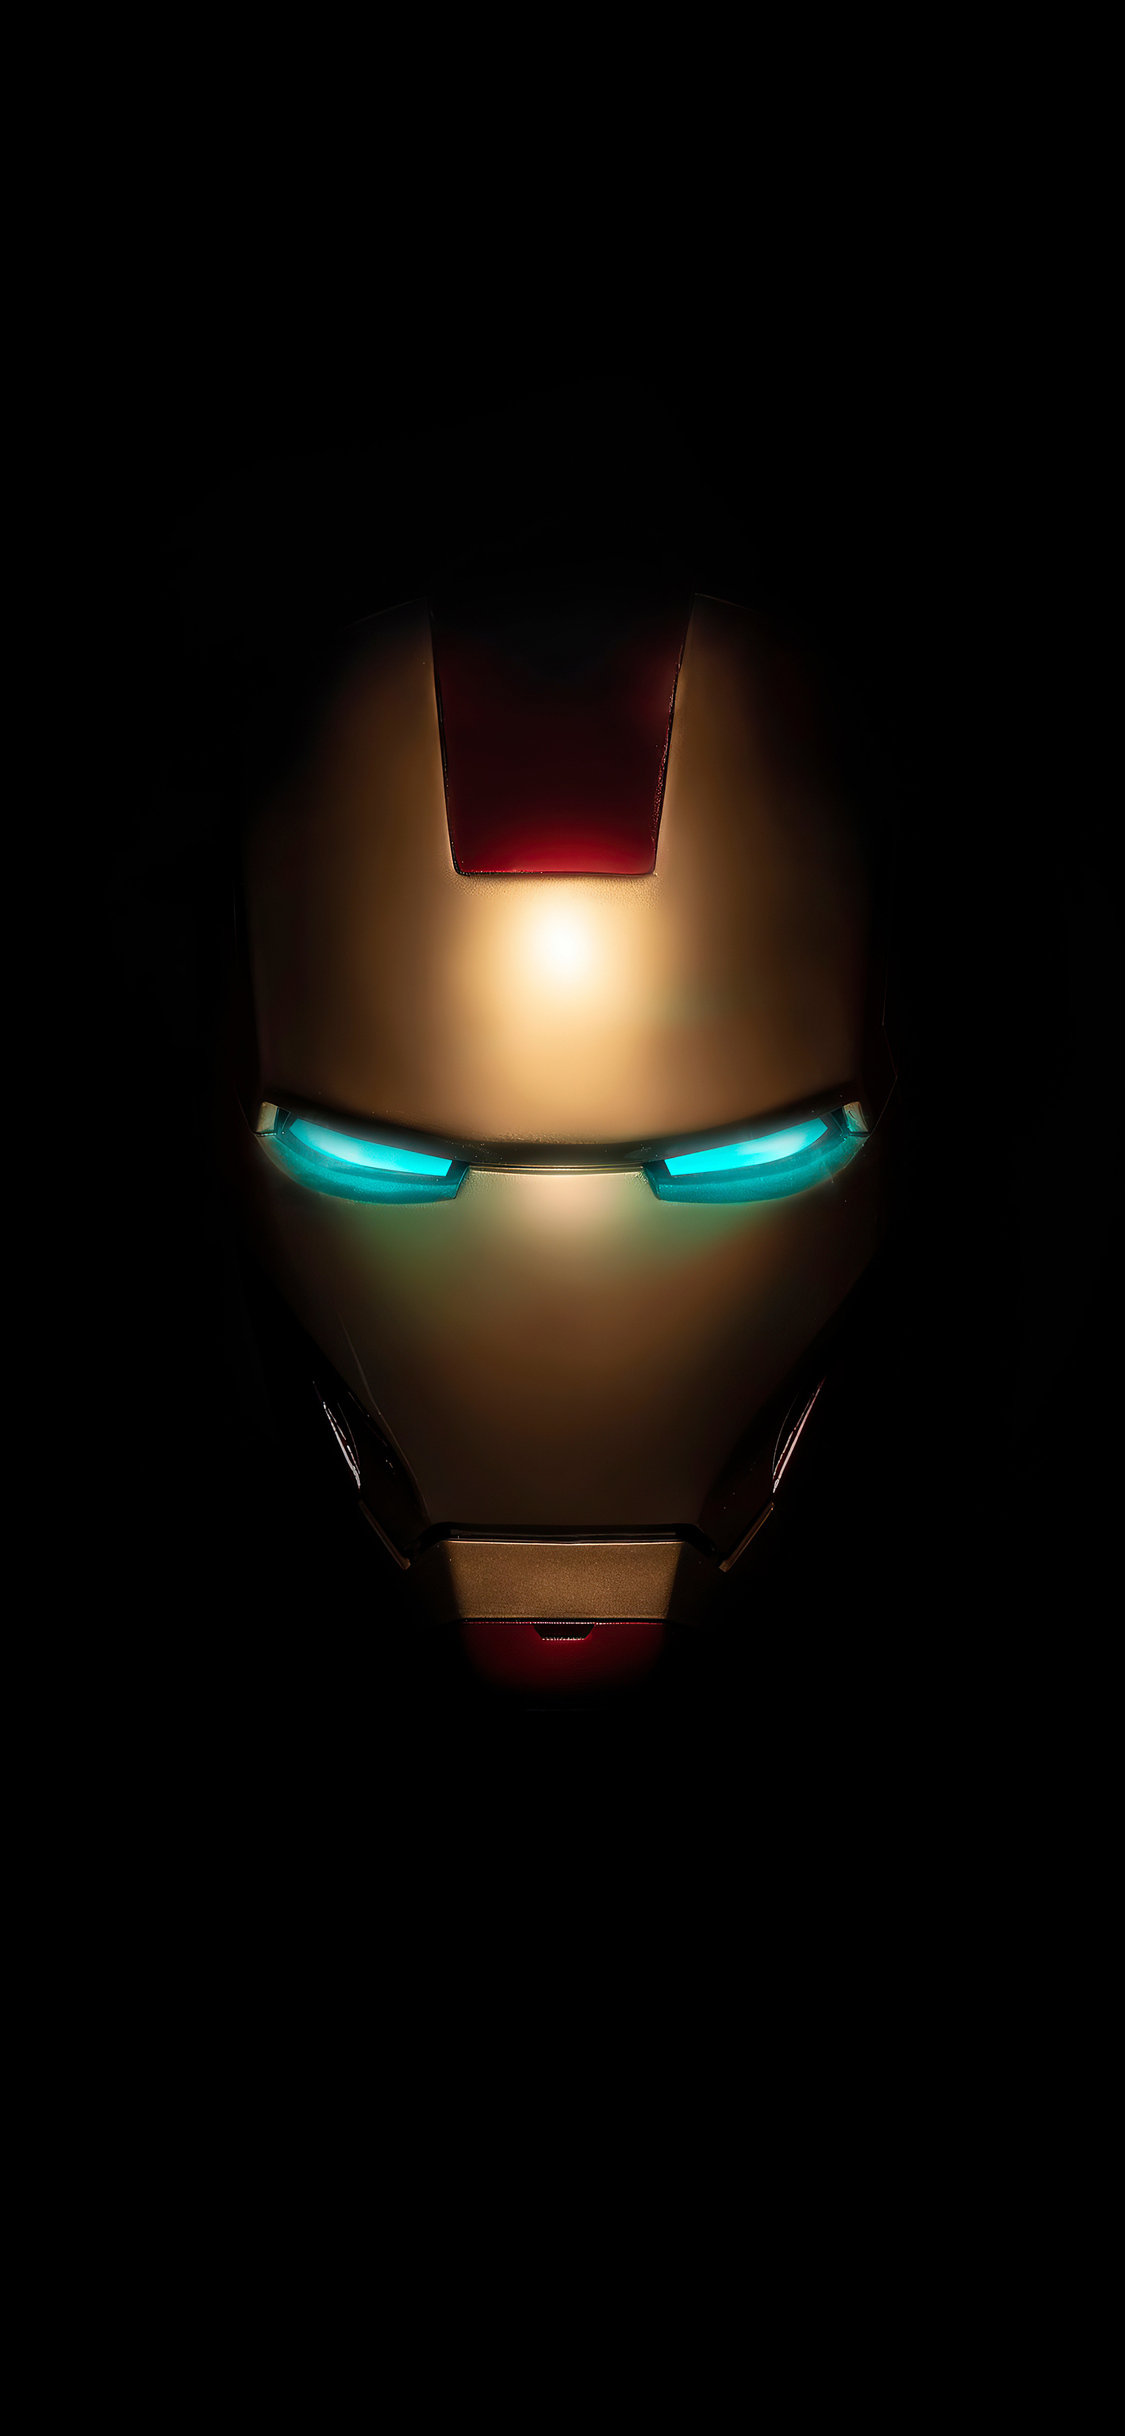 Iron Man Mask 4k iPhone XS, iPhone iPhone X HD 4k Wallpaper, Image, Background, Photo and Picture